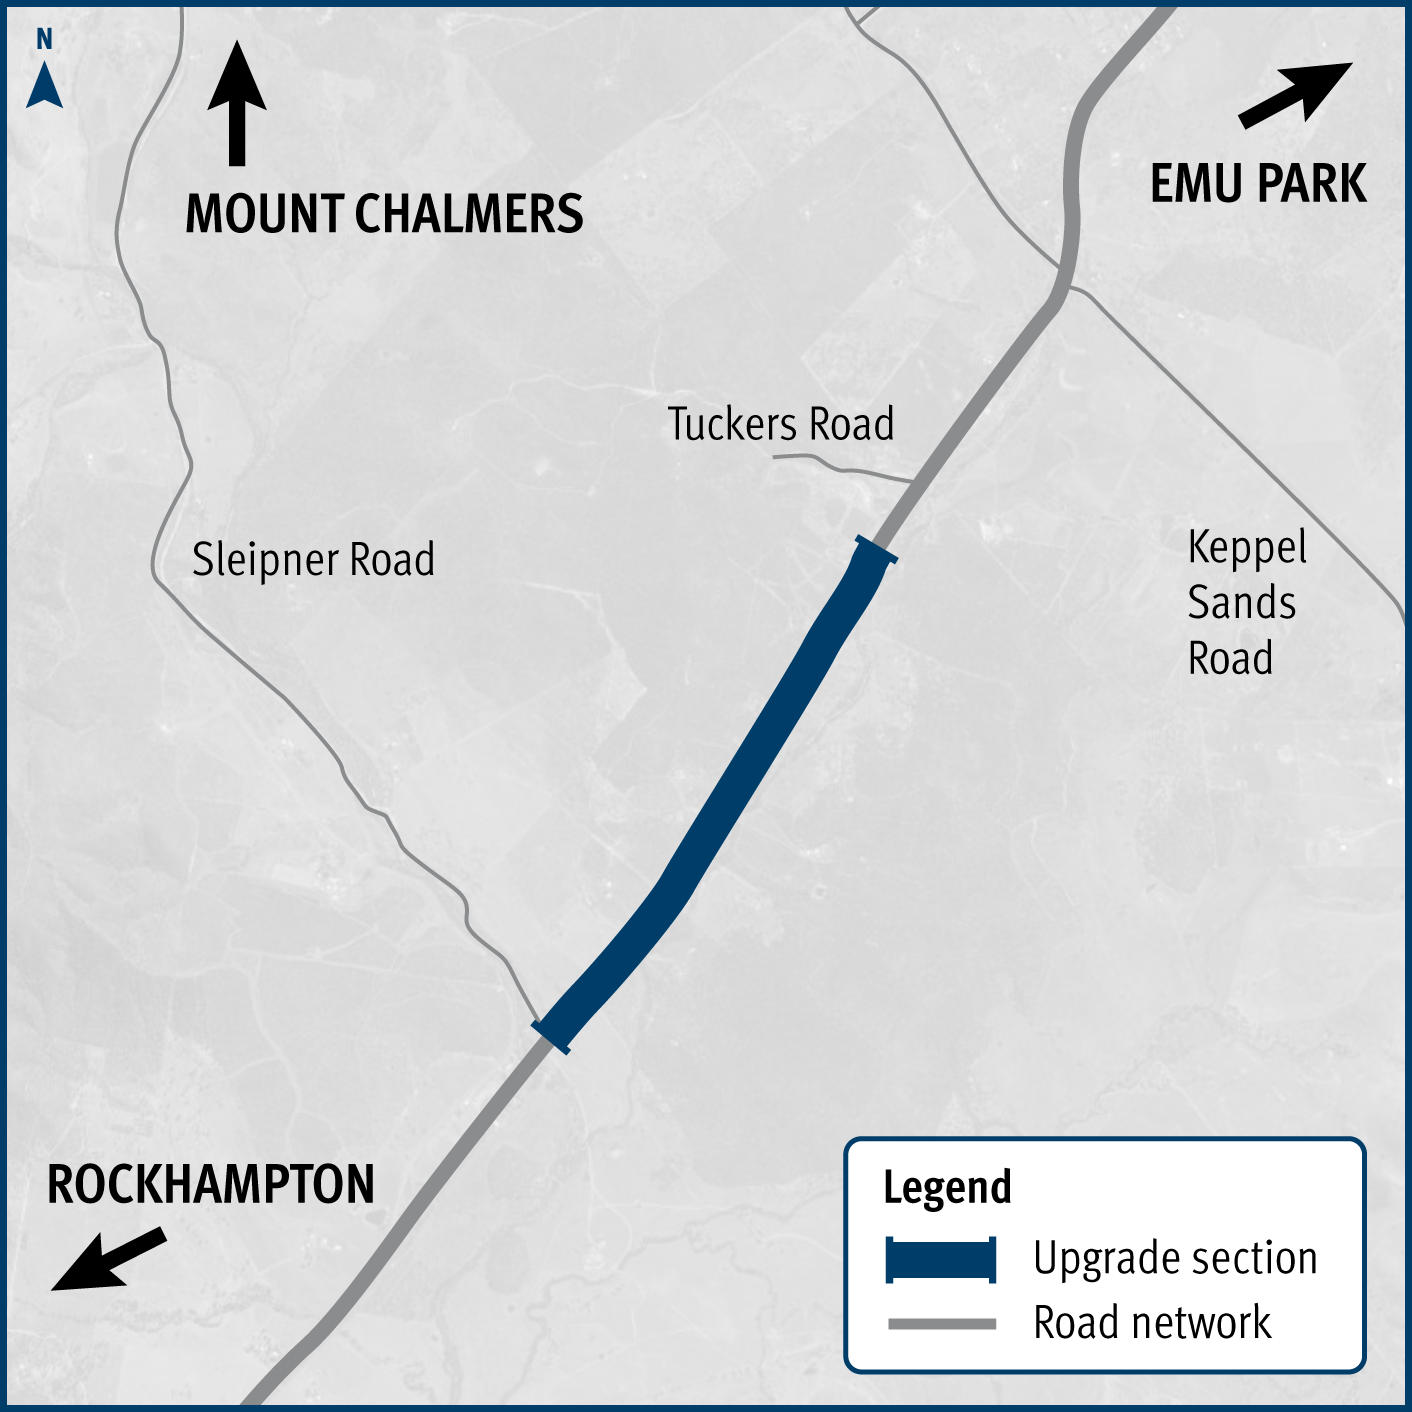 Rockhampton Emu Park Road upgrades including overtaking lanes and other improvements project location map